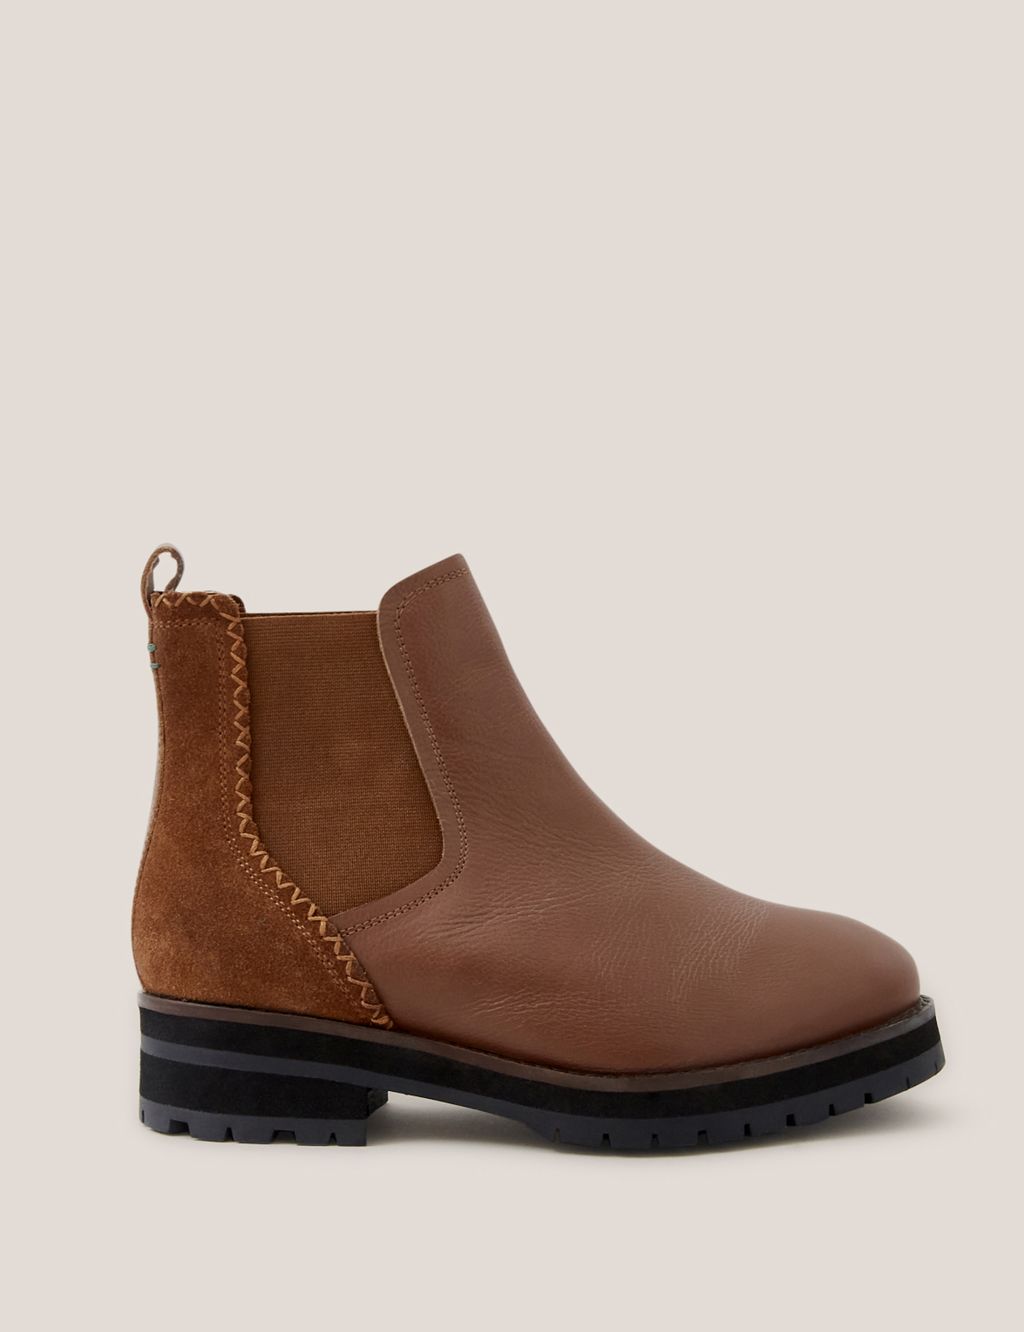 Wide Fit Leather Chelsea Boots image 1